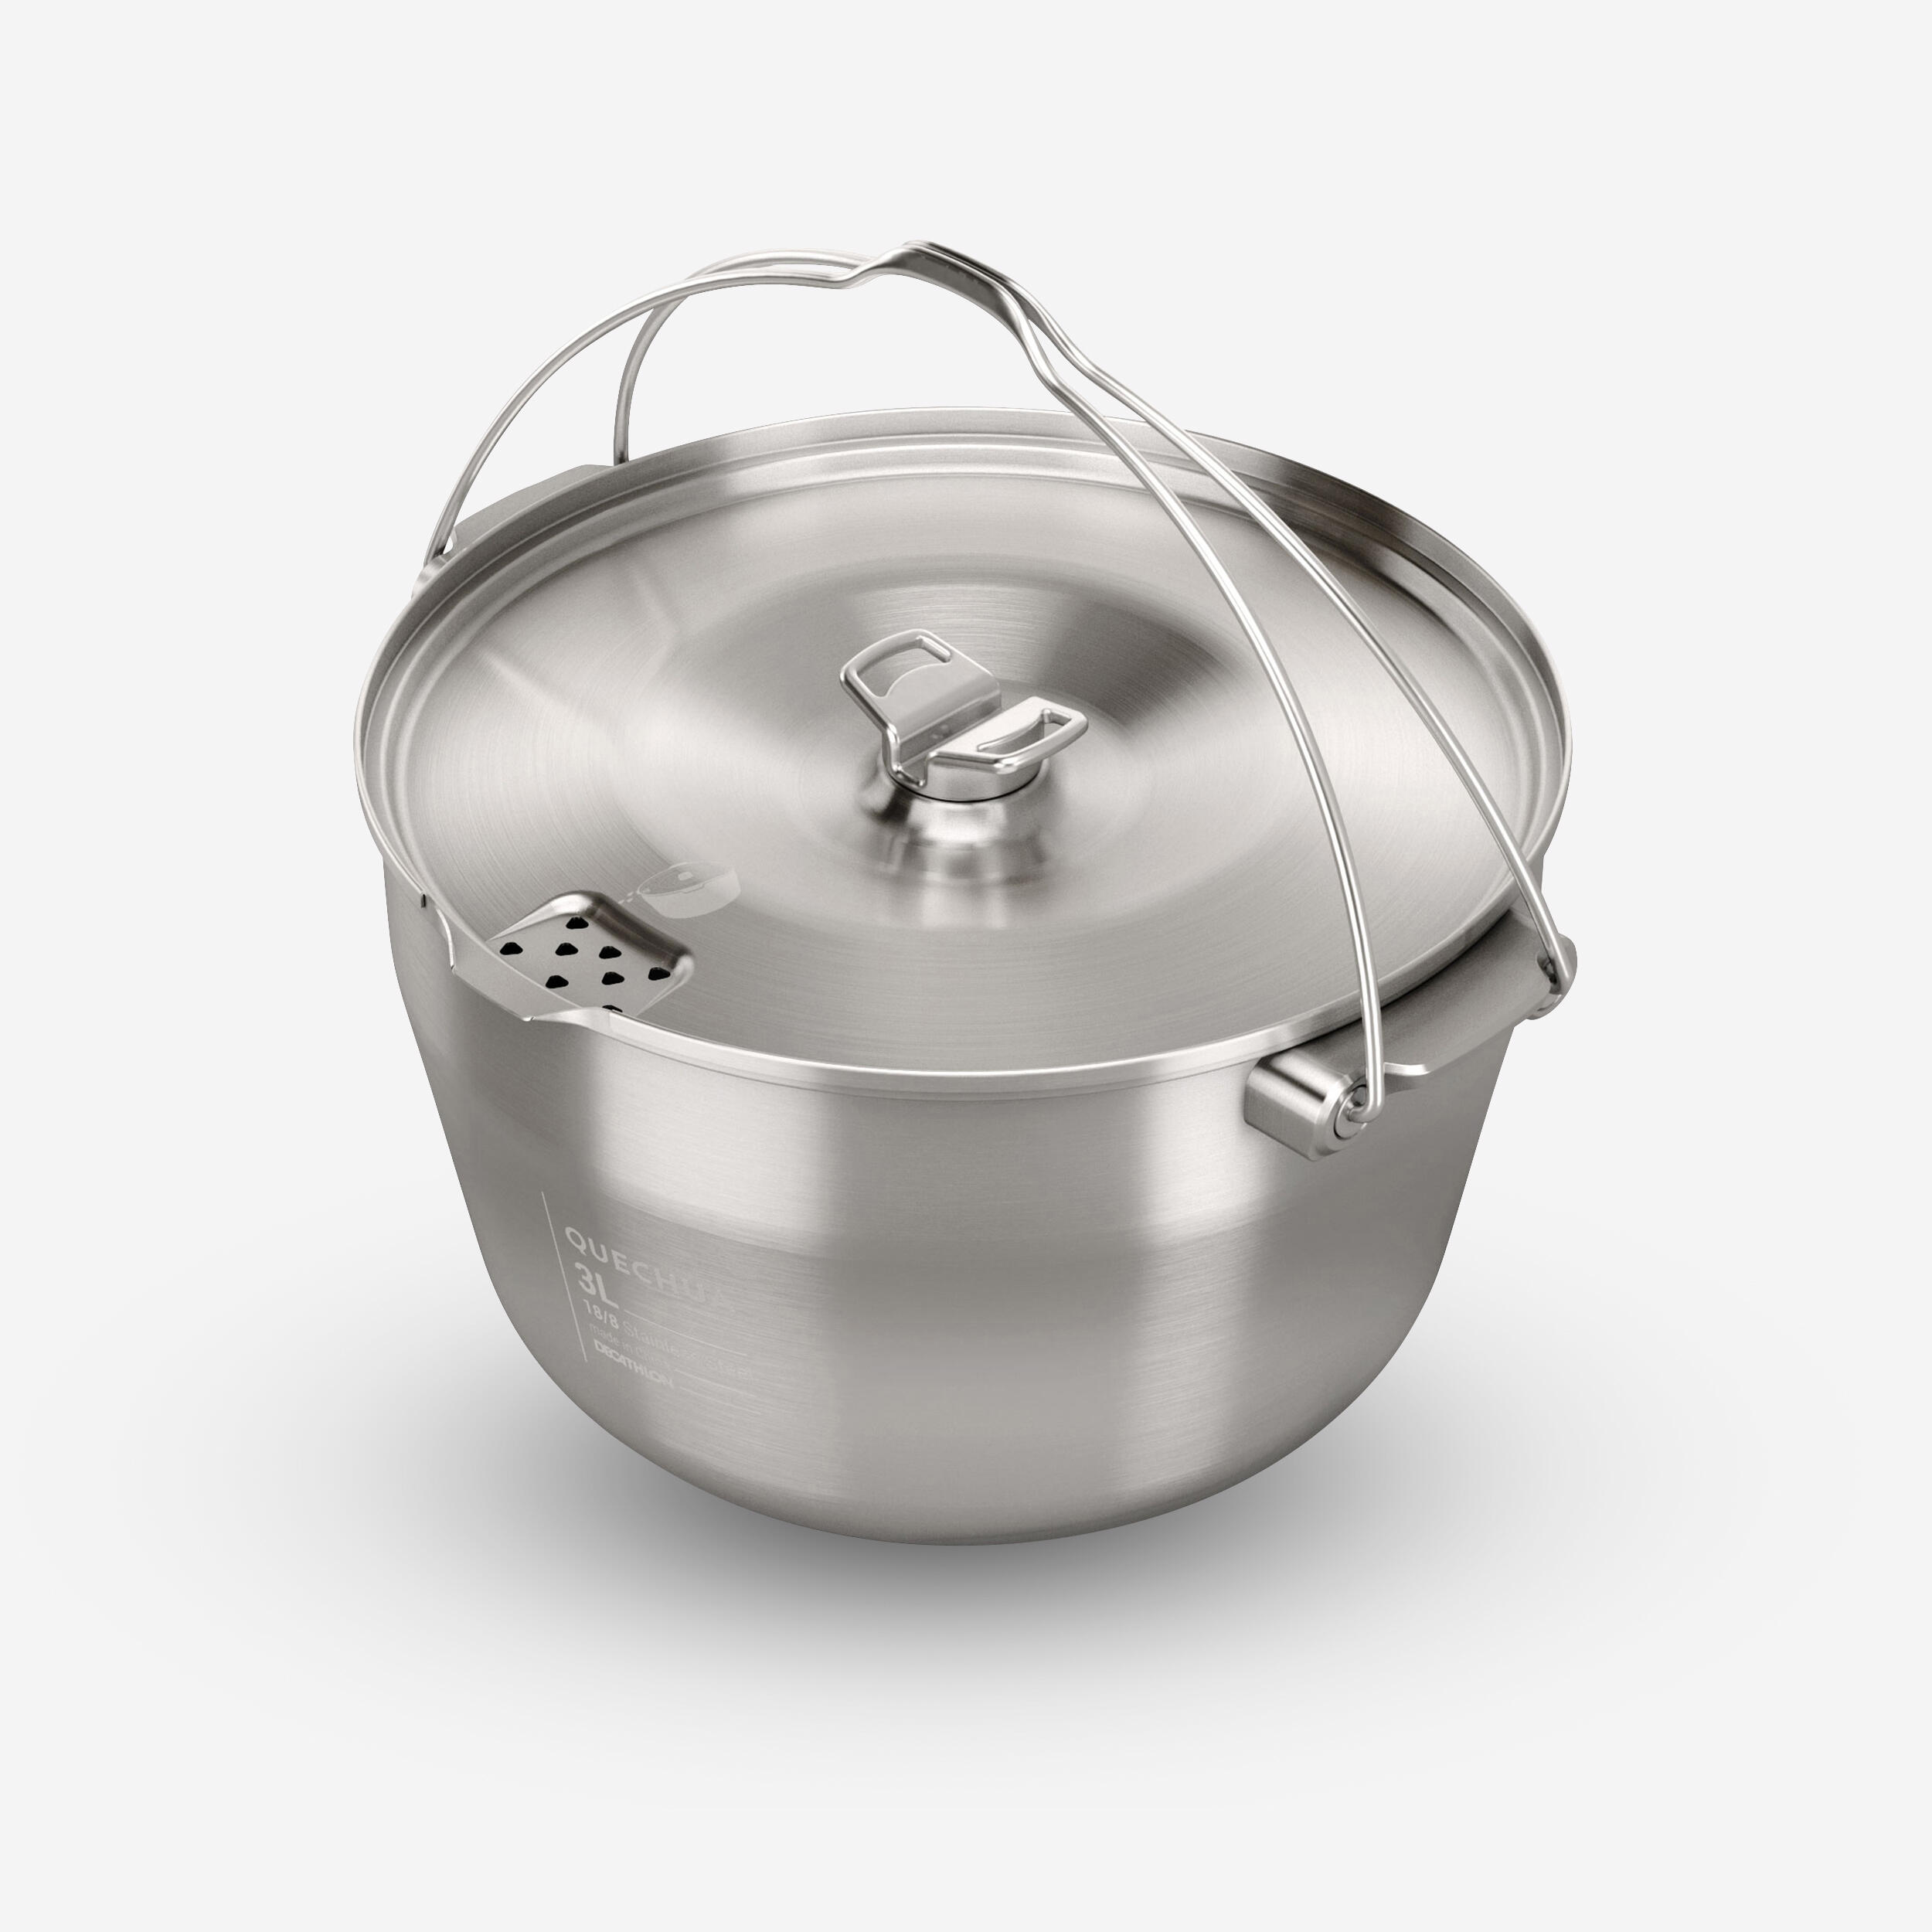 4-person camp fire cooking pot - stainless steel -3 litres 4/8